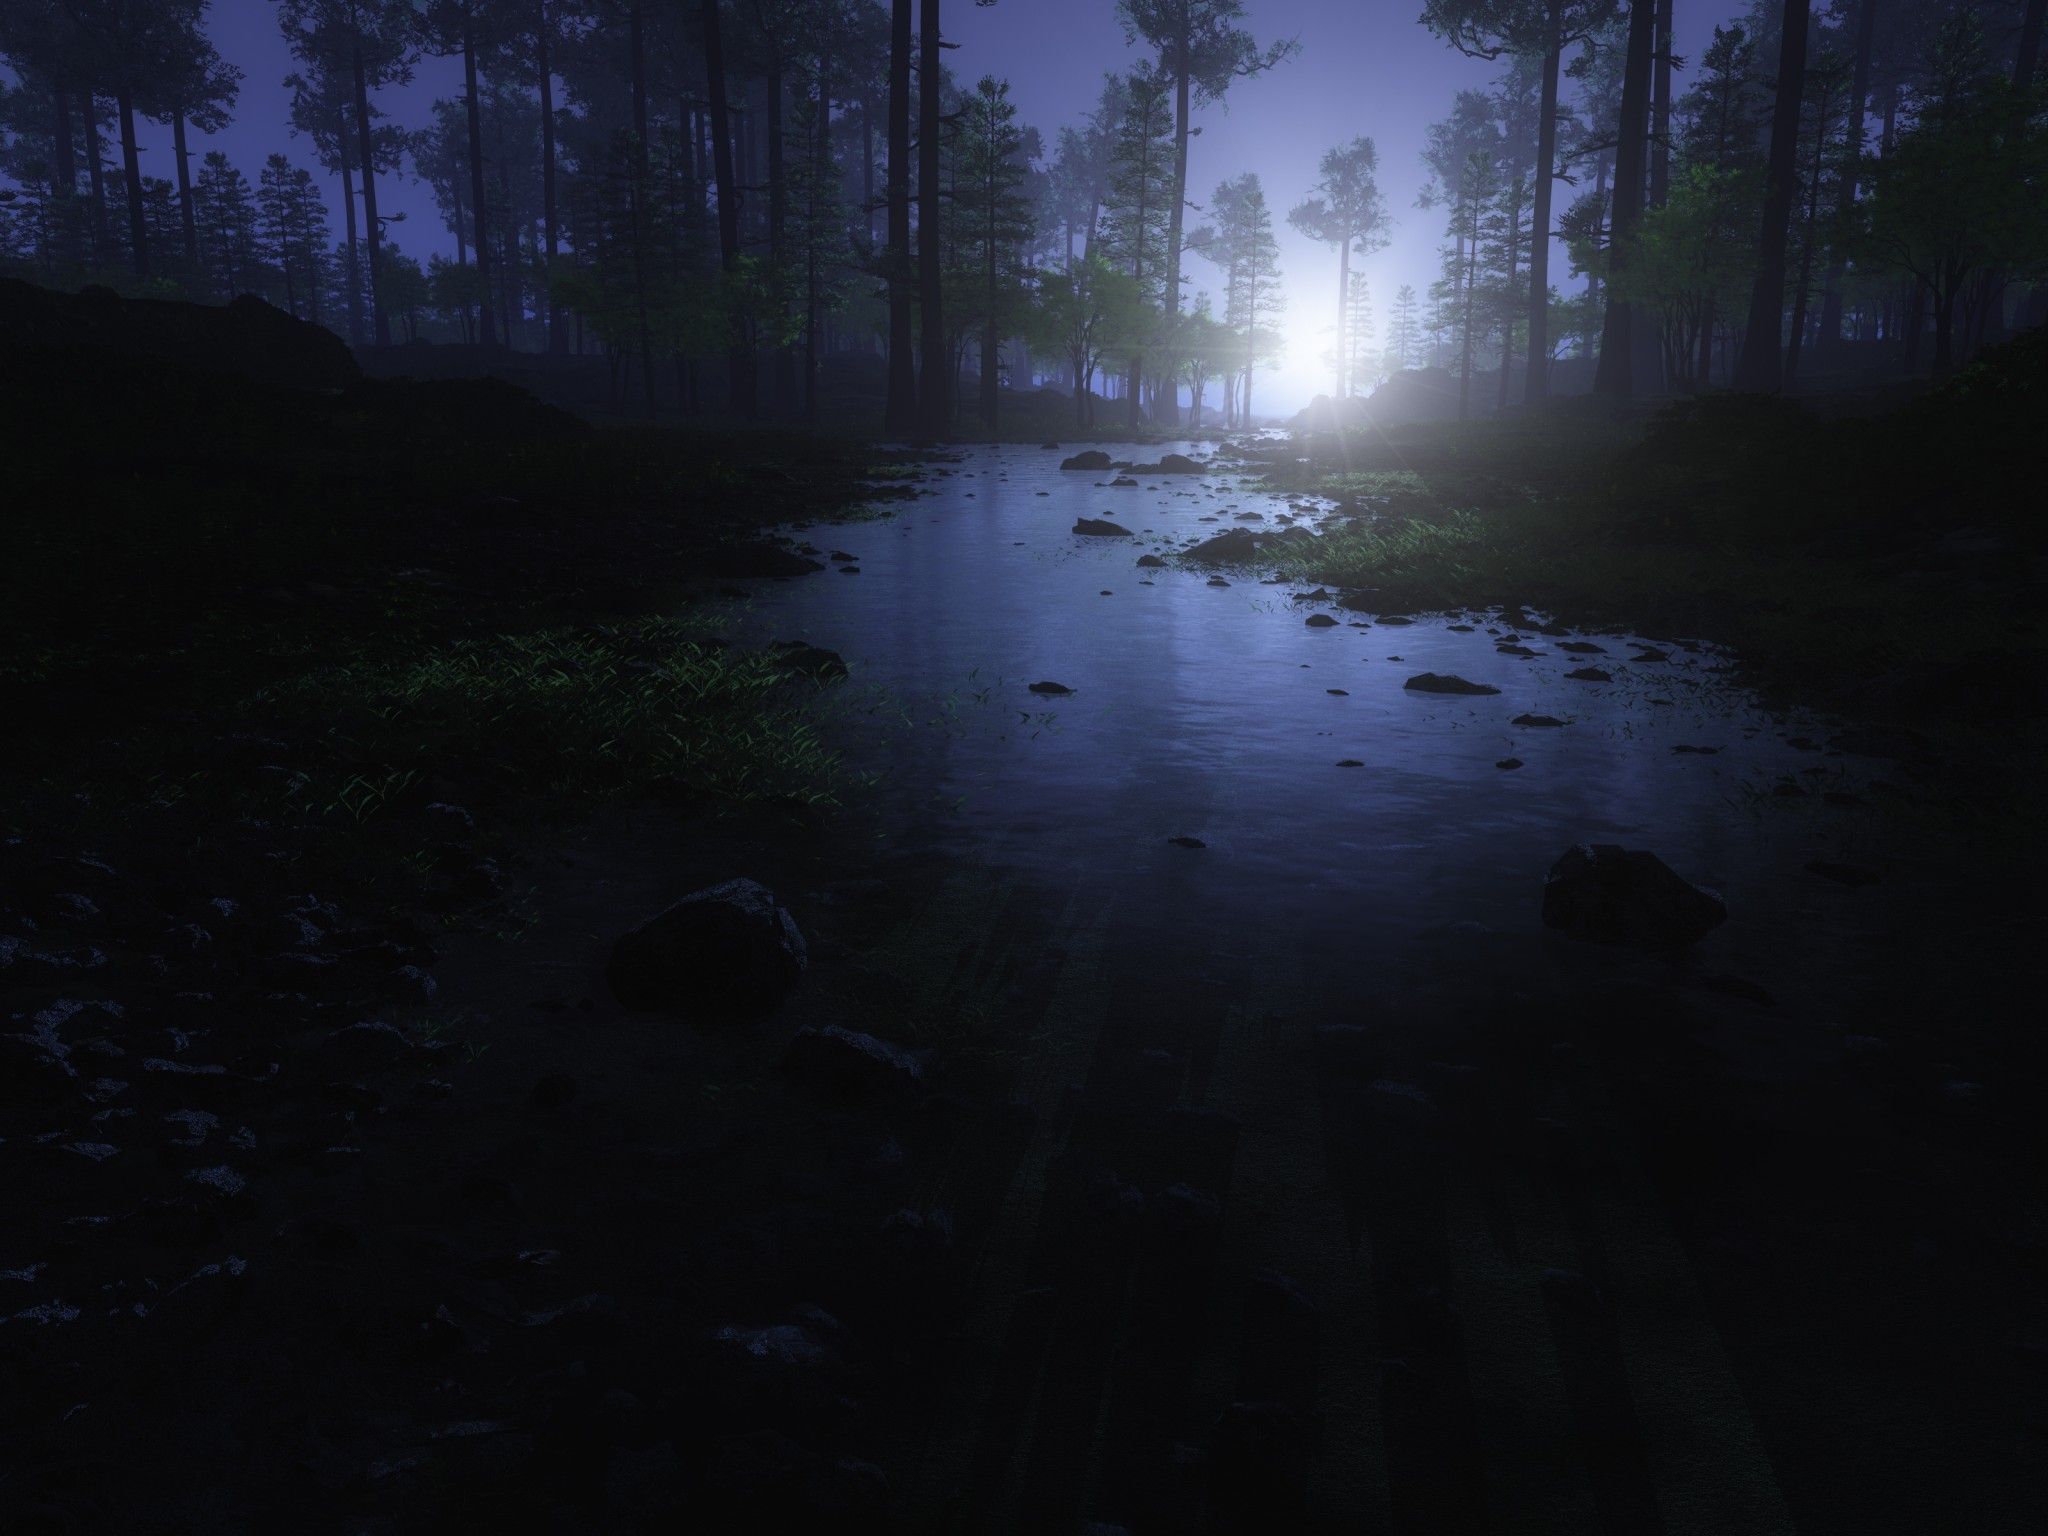 Dark Forest 4K Wallpaper, Water Stream, Trees, Landscape, Woods, Night time, Nature